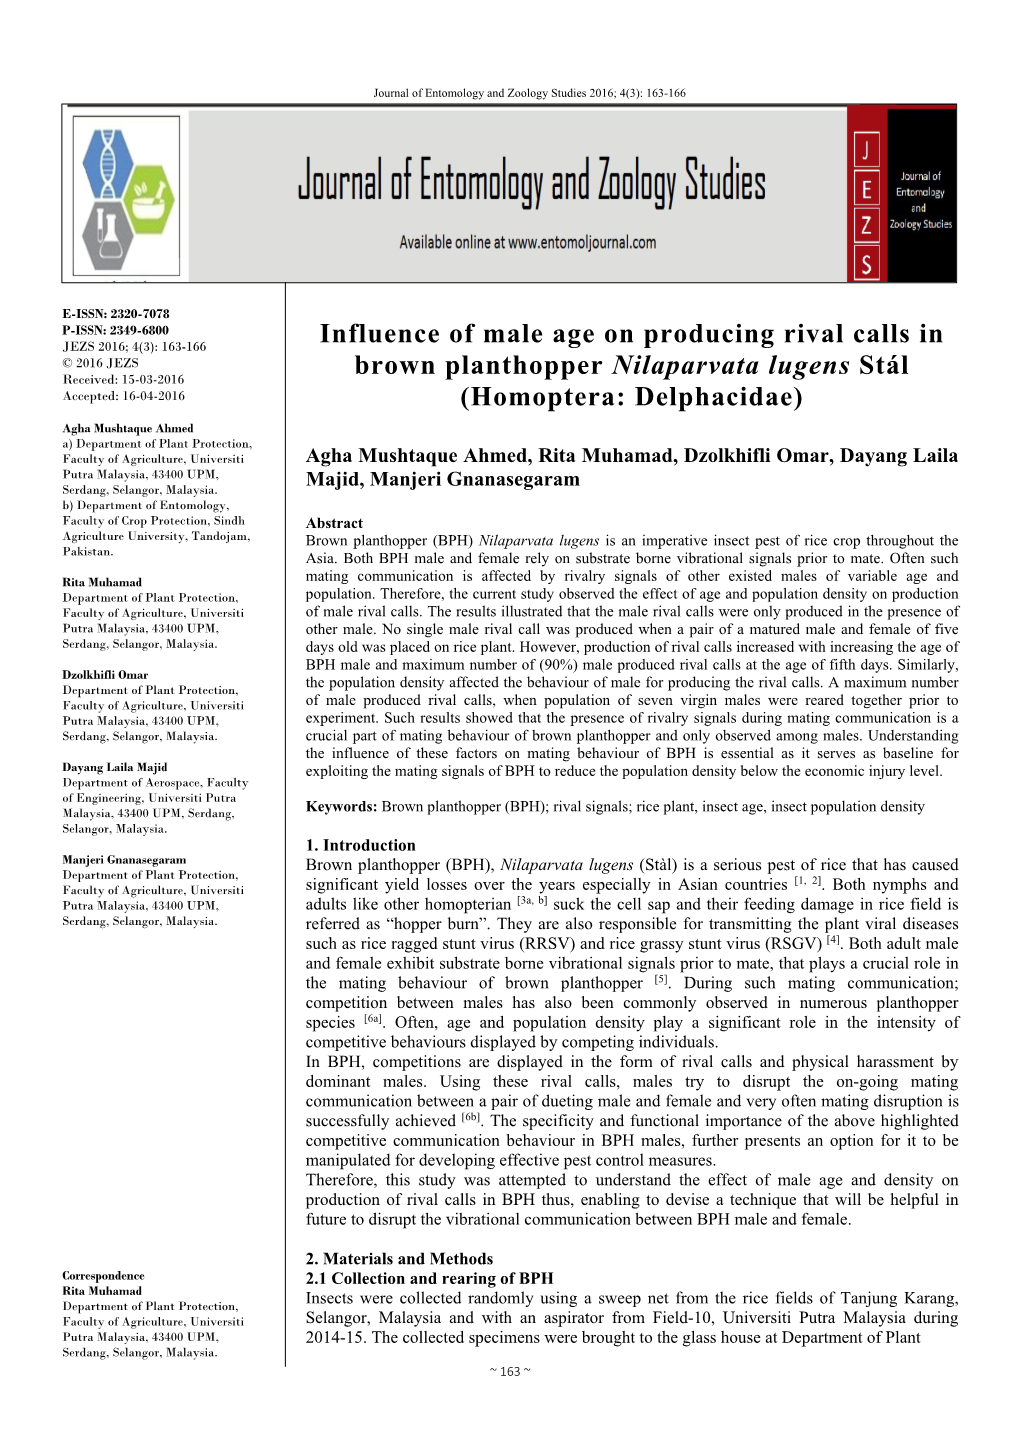 Influence of Male Age on Producing Rival Calls in Brown Planthopper